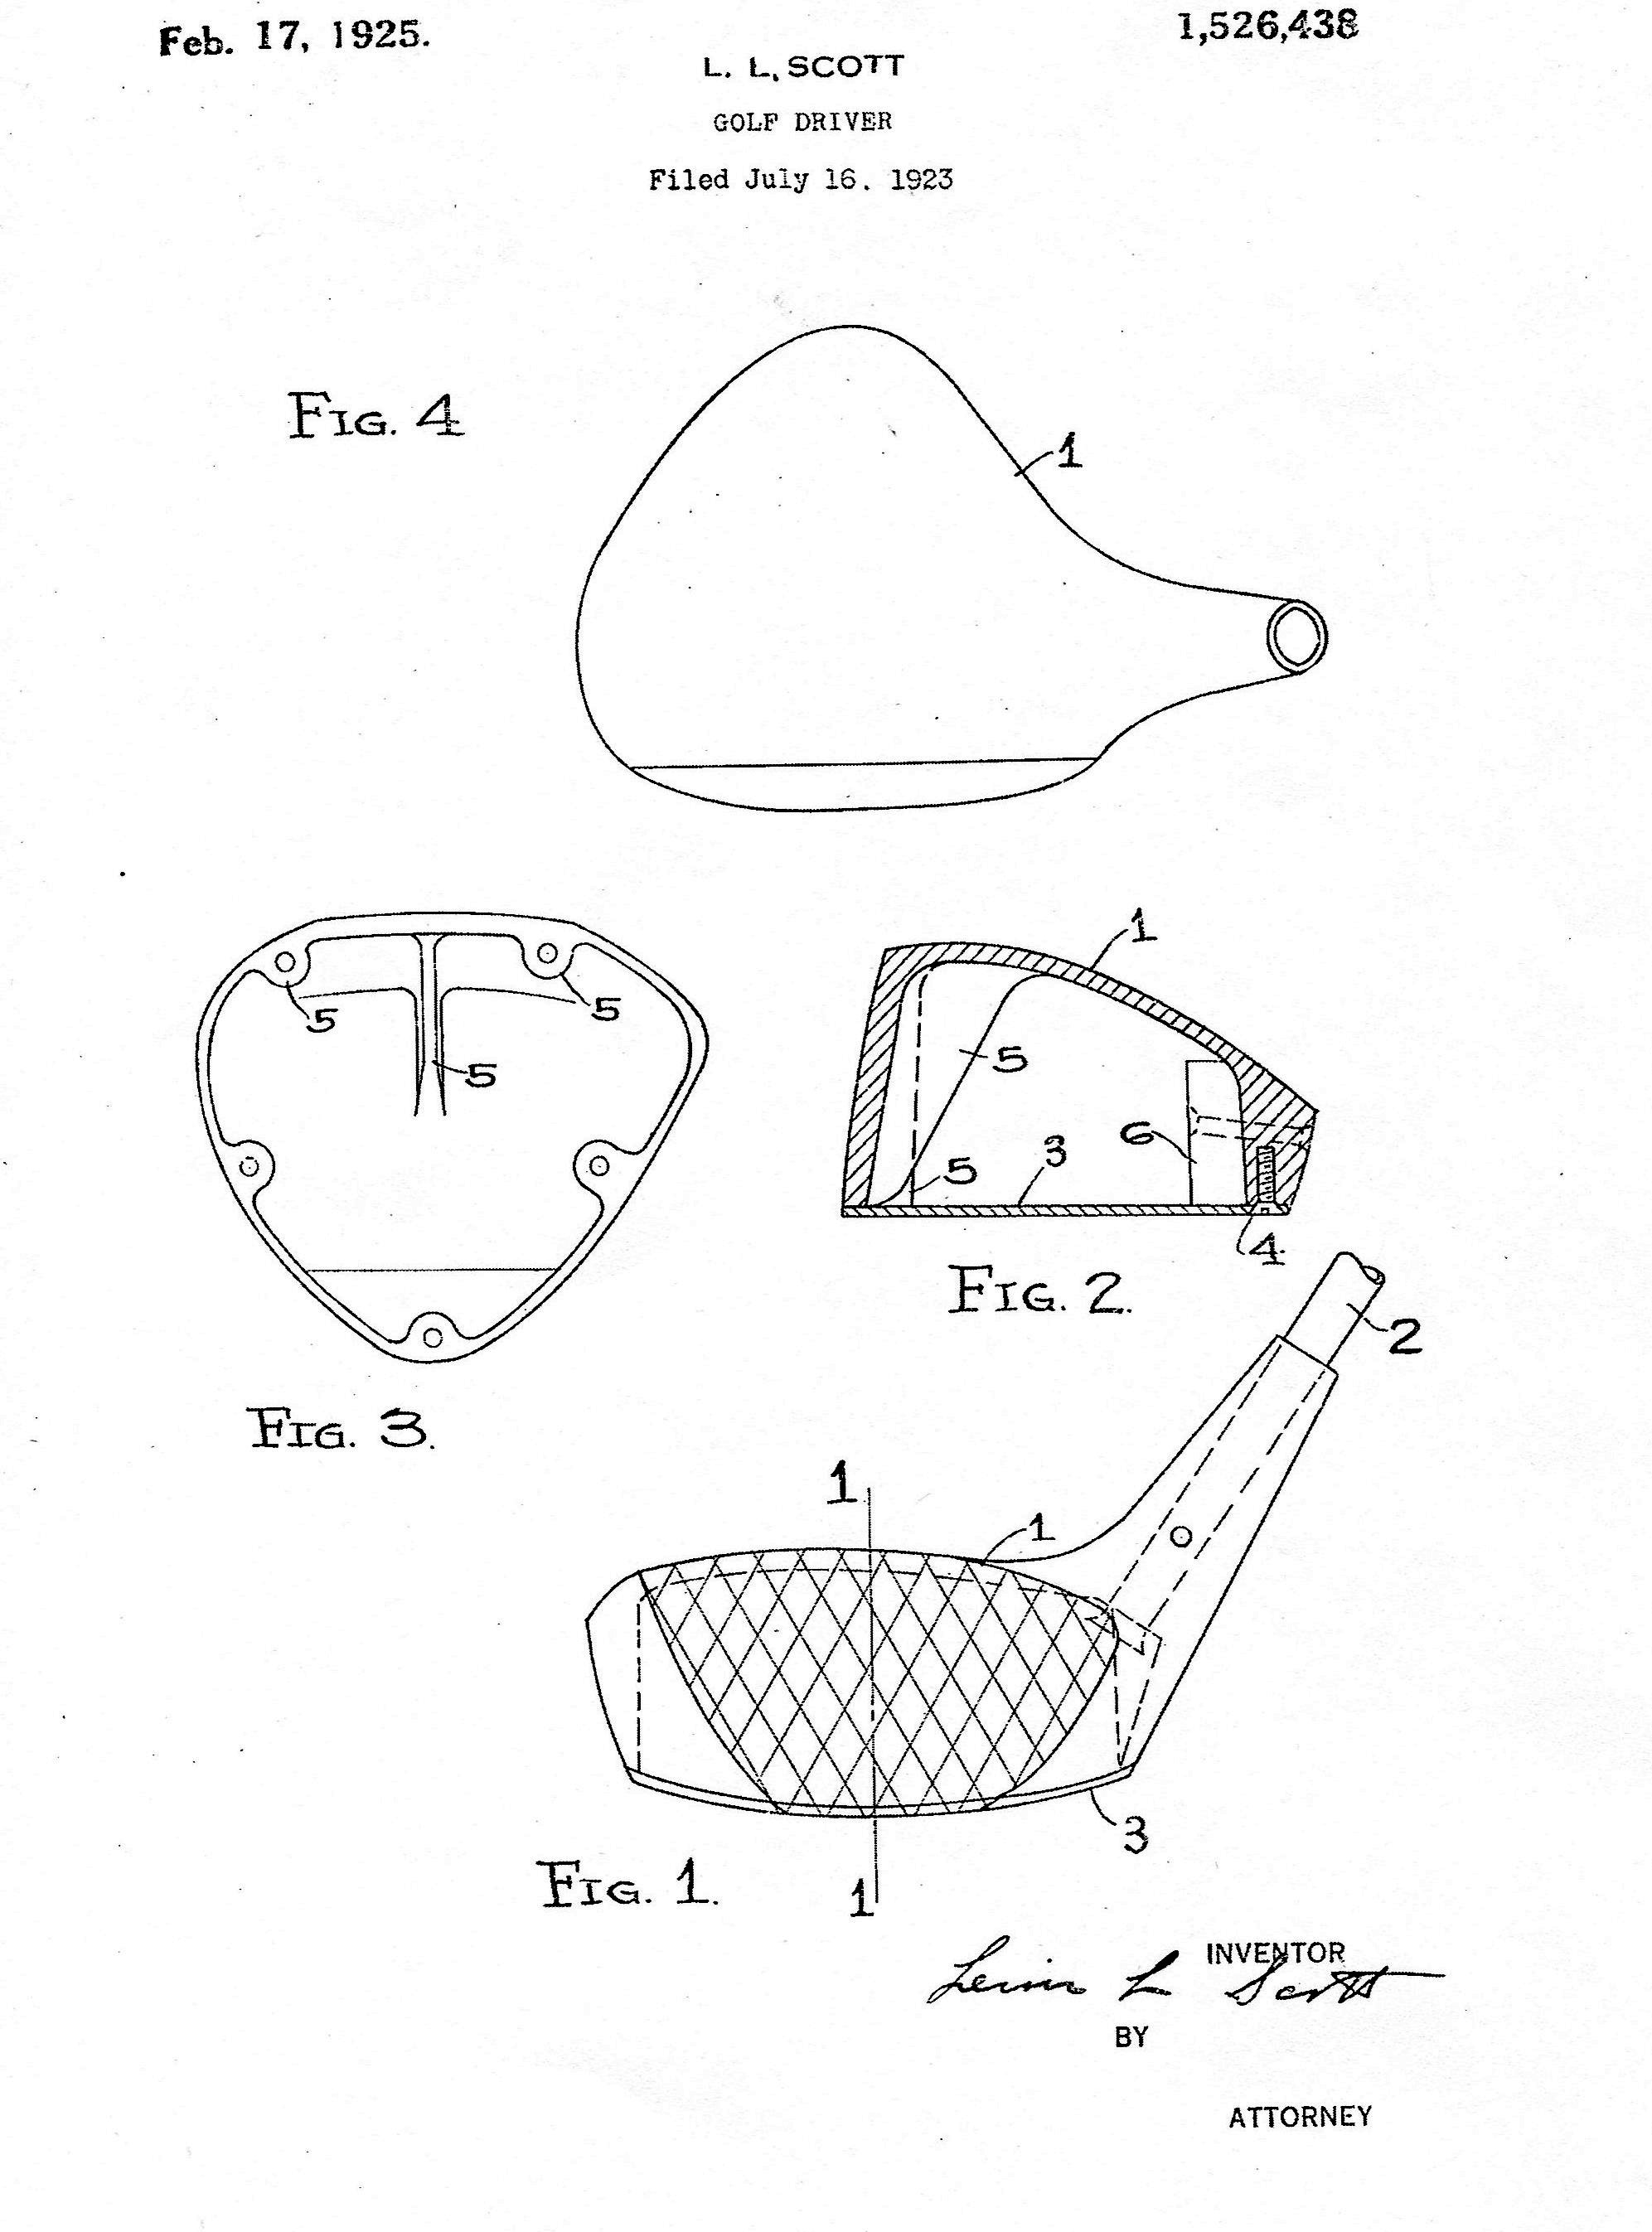 A copy to the patent drawings for the first metal golf driver.